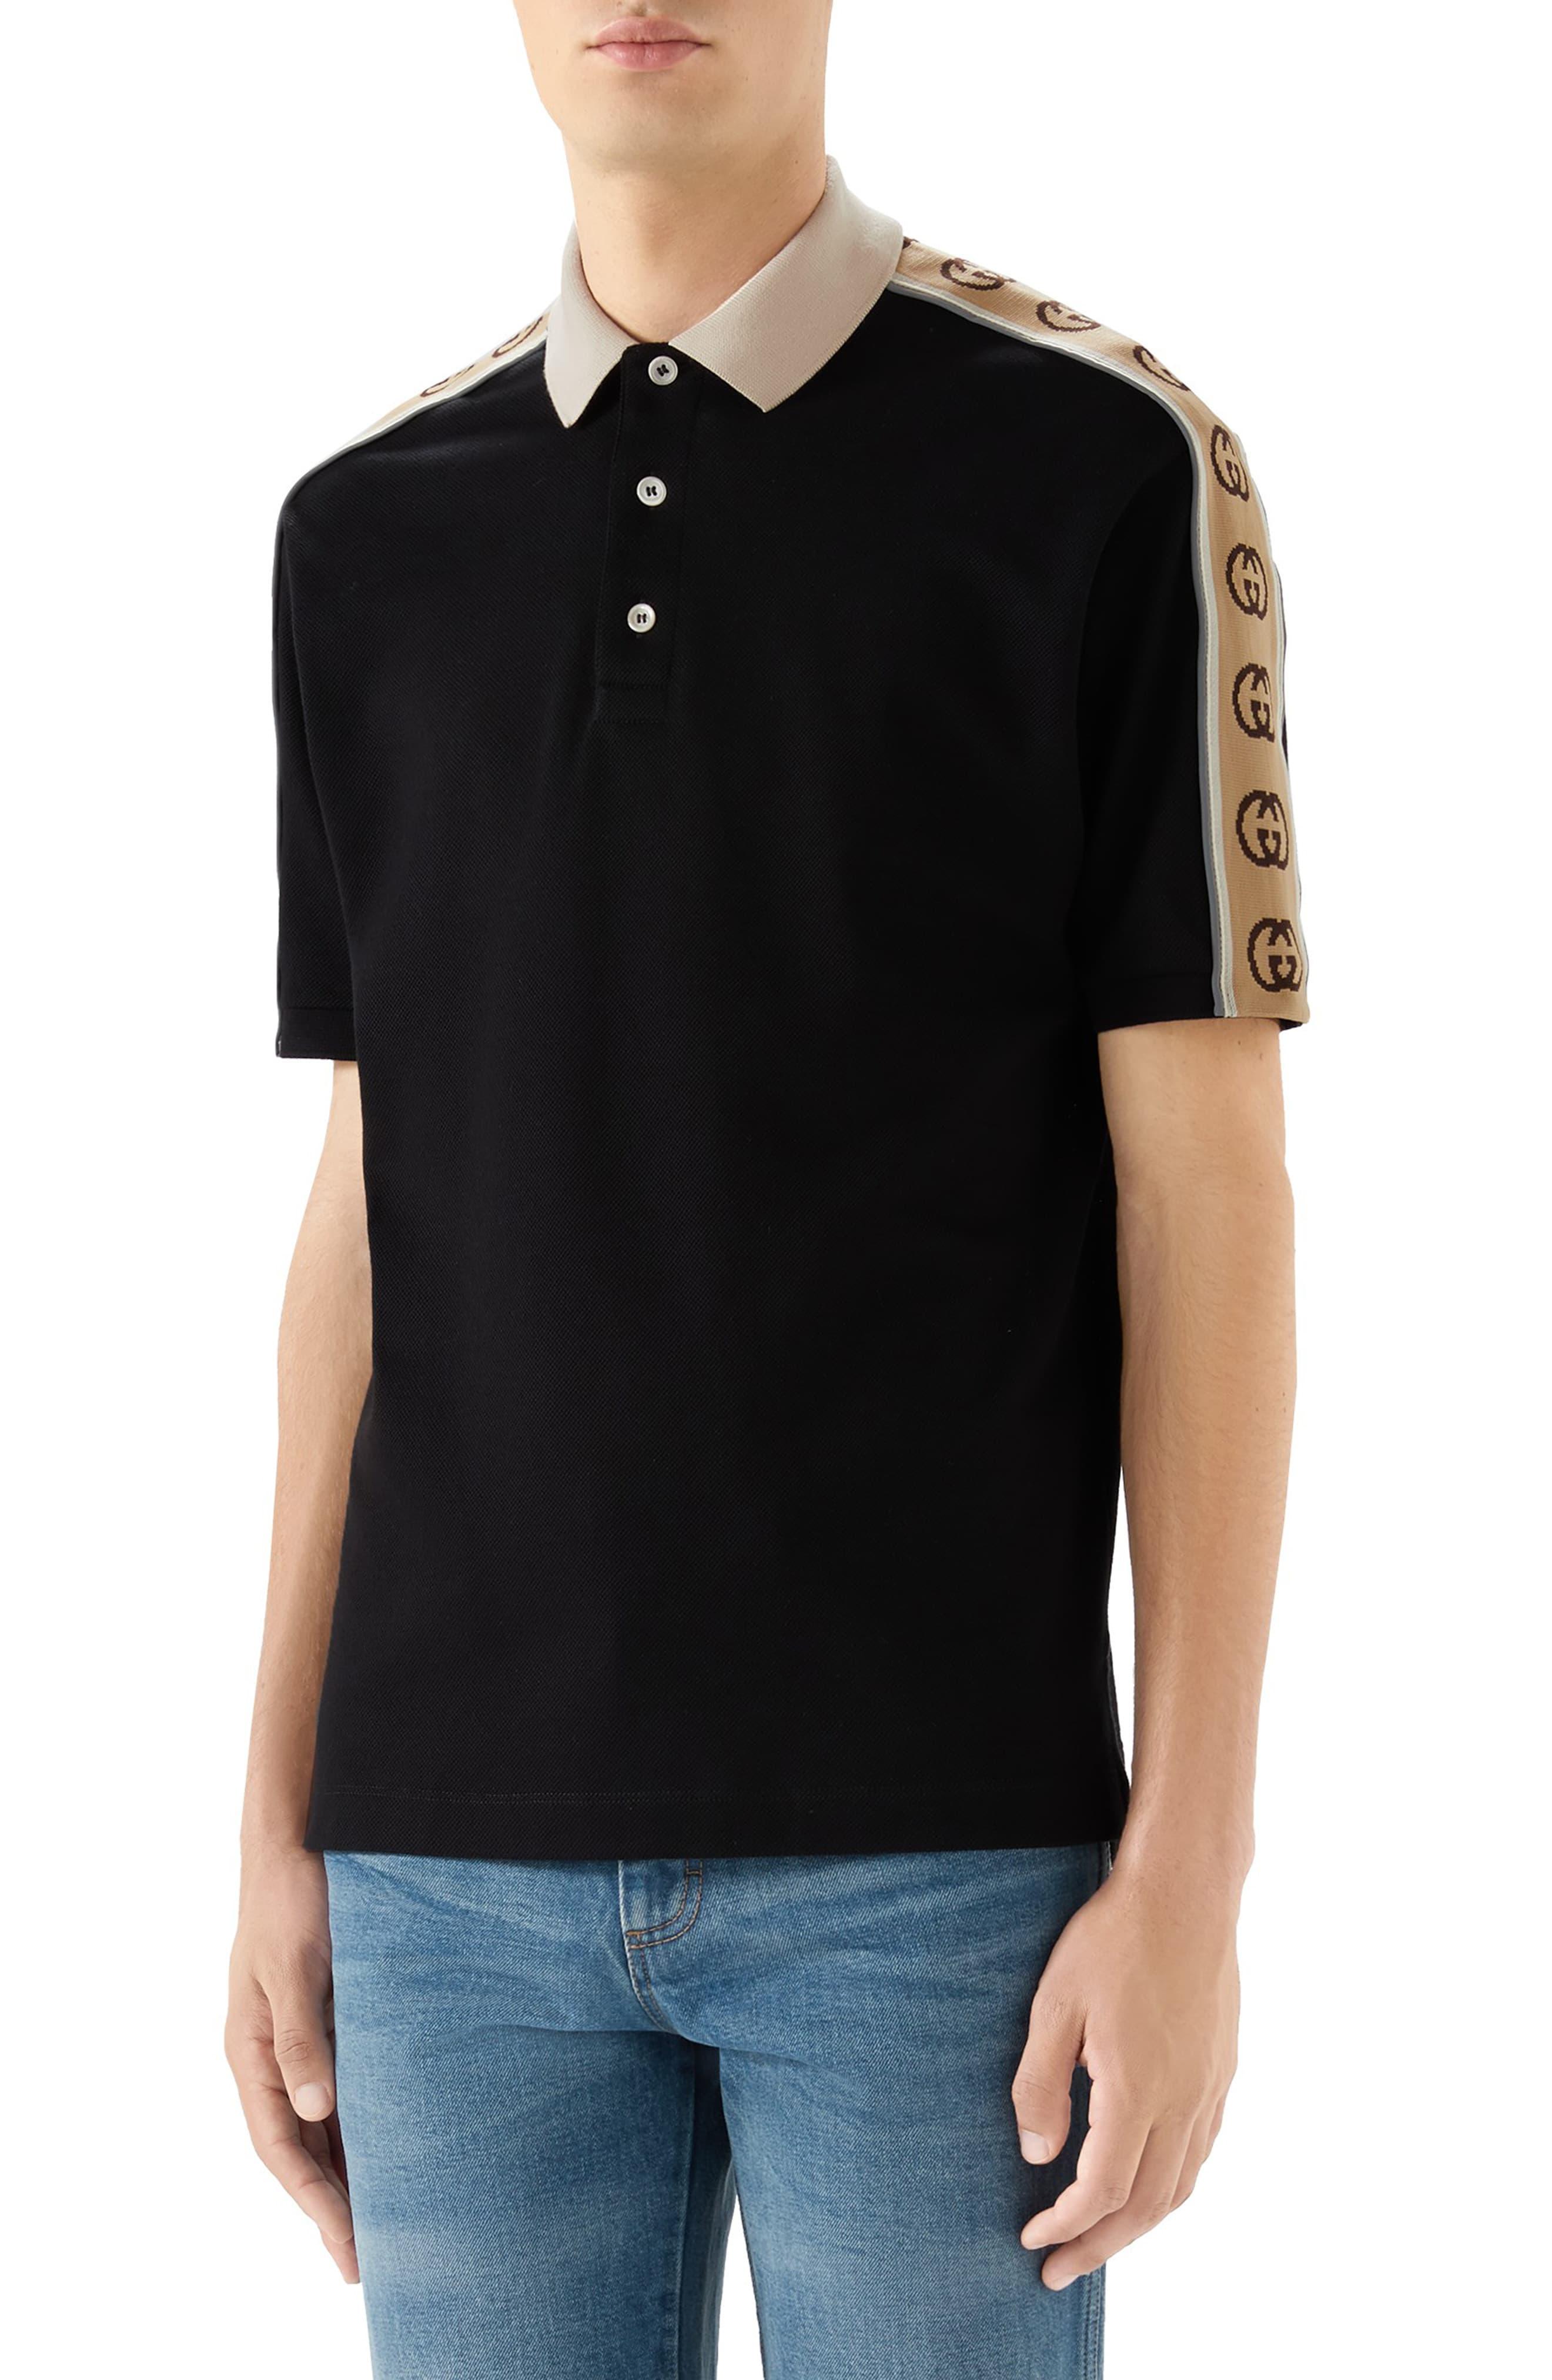 Gucci Synthetic GG Stripe Polo Shirt in Black for Men - Lyst